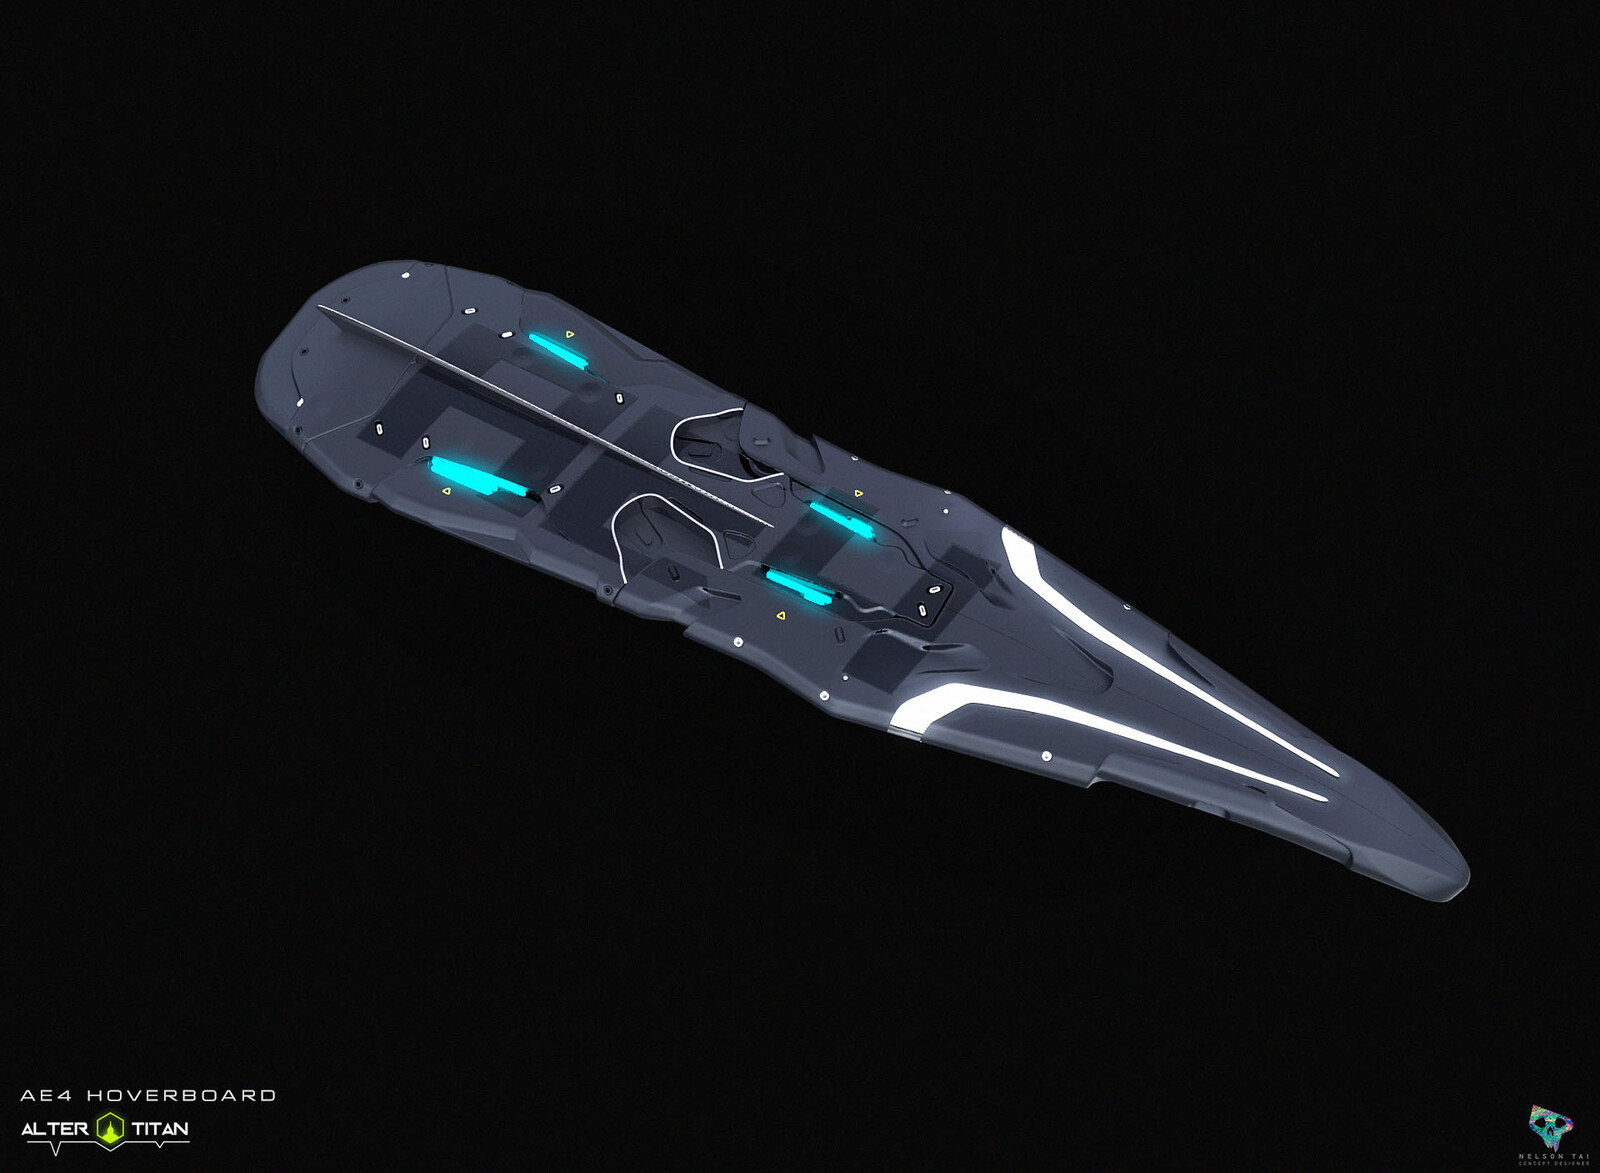 Backside of the Hoverboard